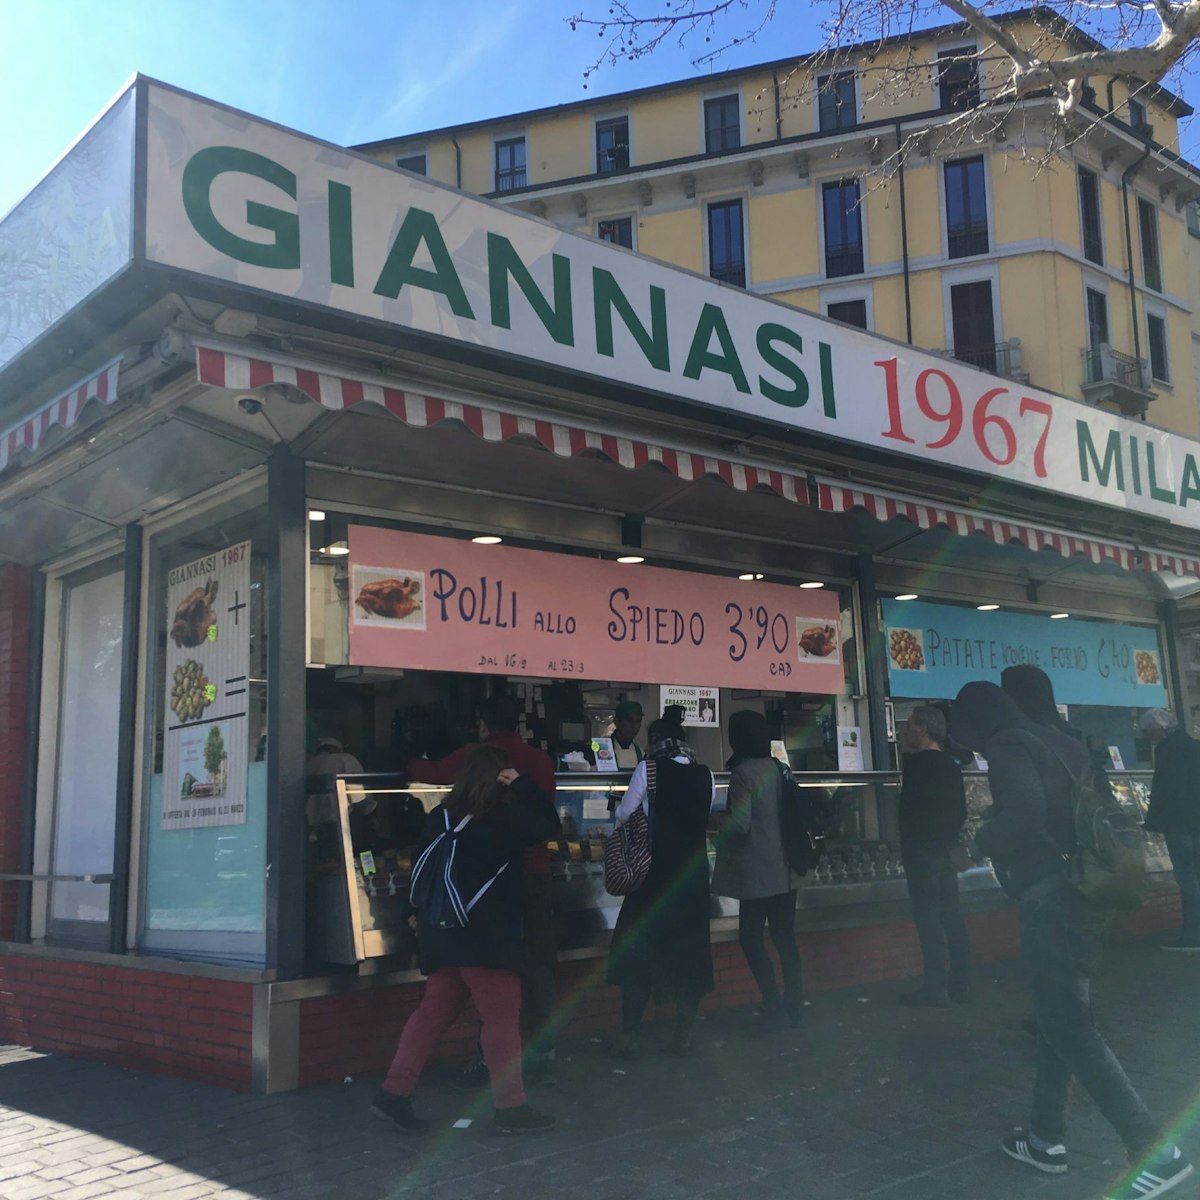 The famous Giannasi chicken stand